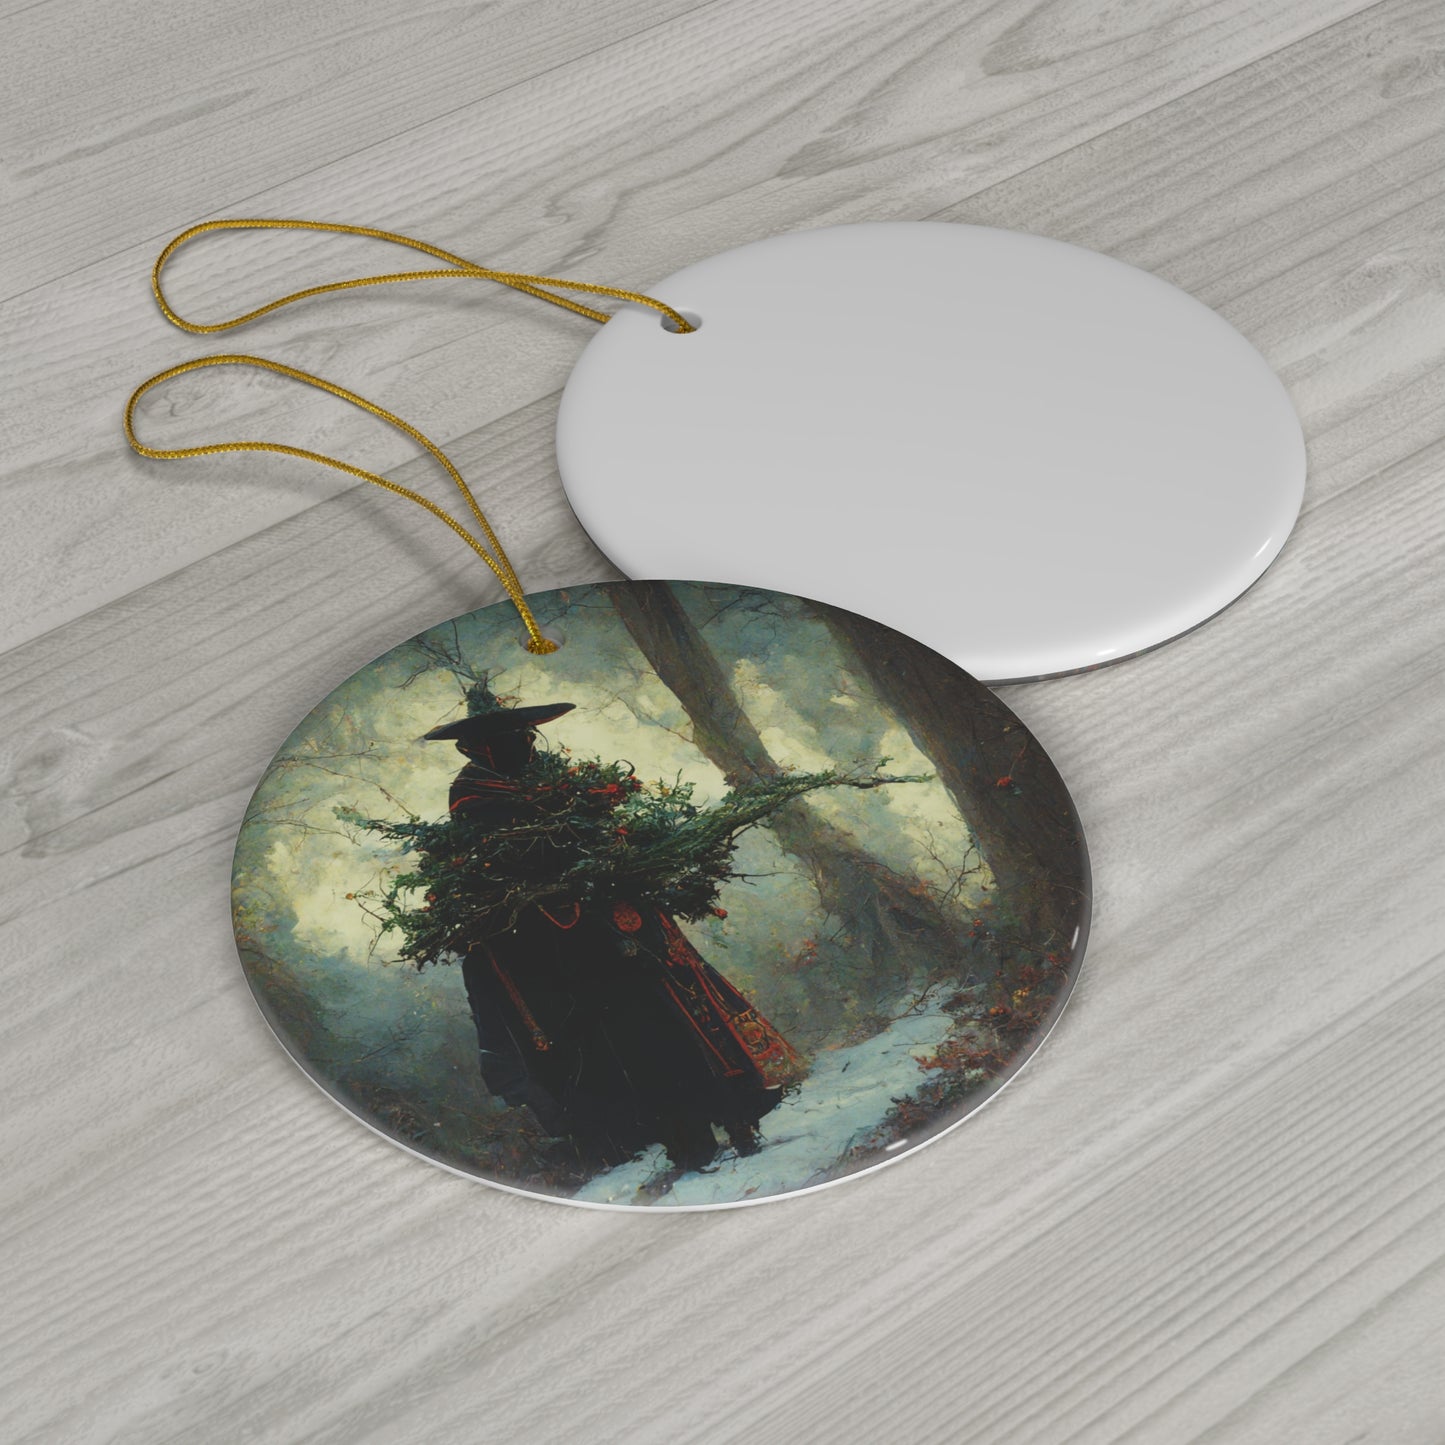 Ceramic Pagan Yule Ornament - Masculine Witch in the winter woods of yule - Blessed Yule! Round Circle ornament for Yule Tree